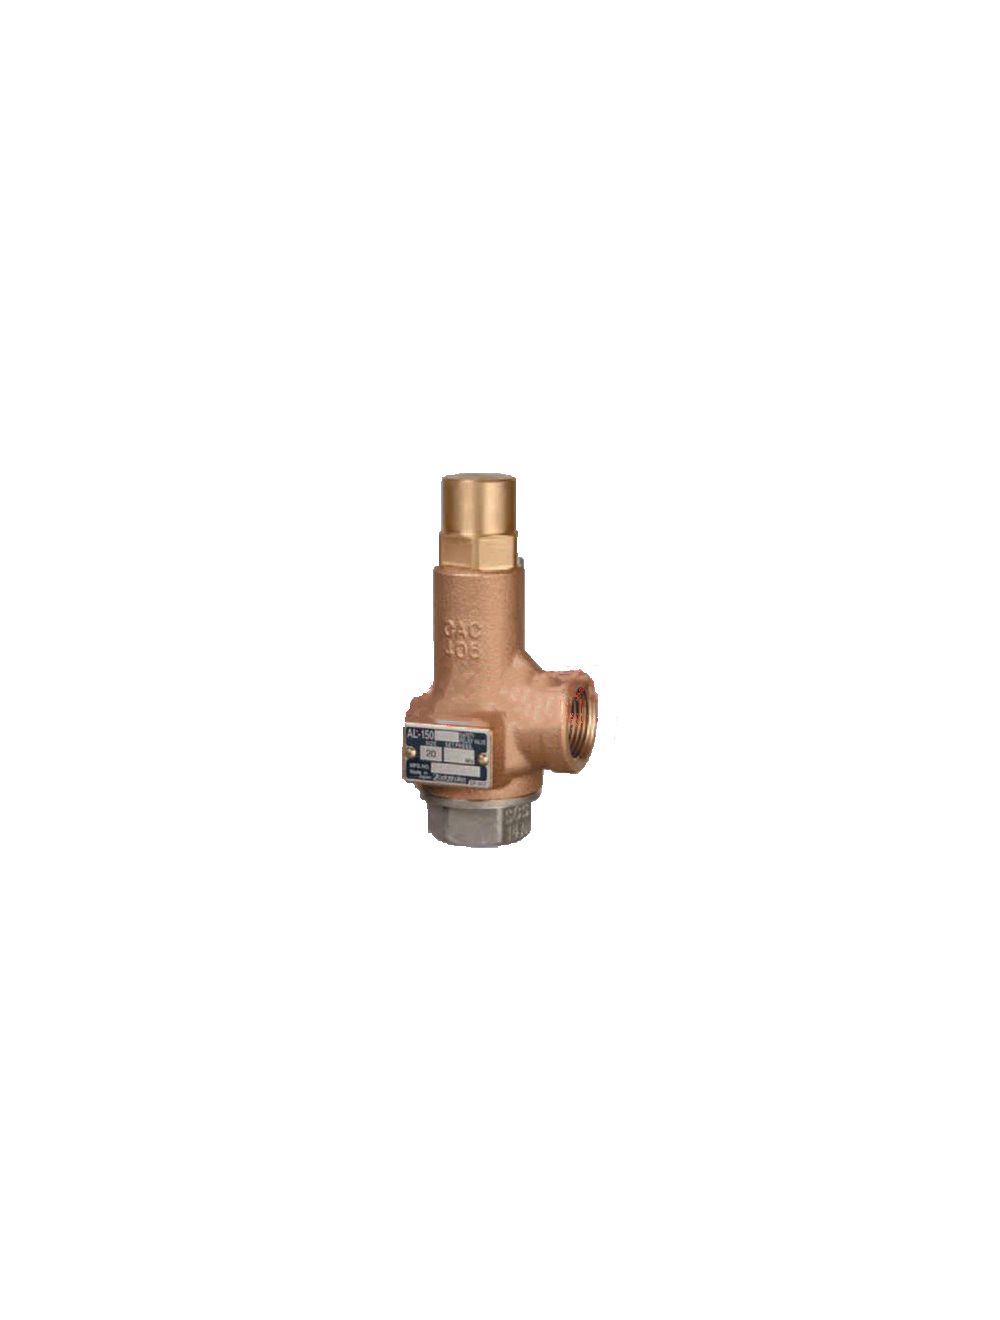 New In stock for sale, Yoshitake Safety Valve AL-150